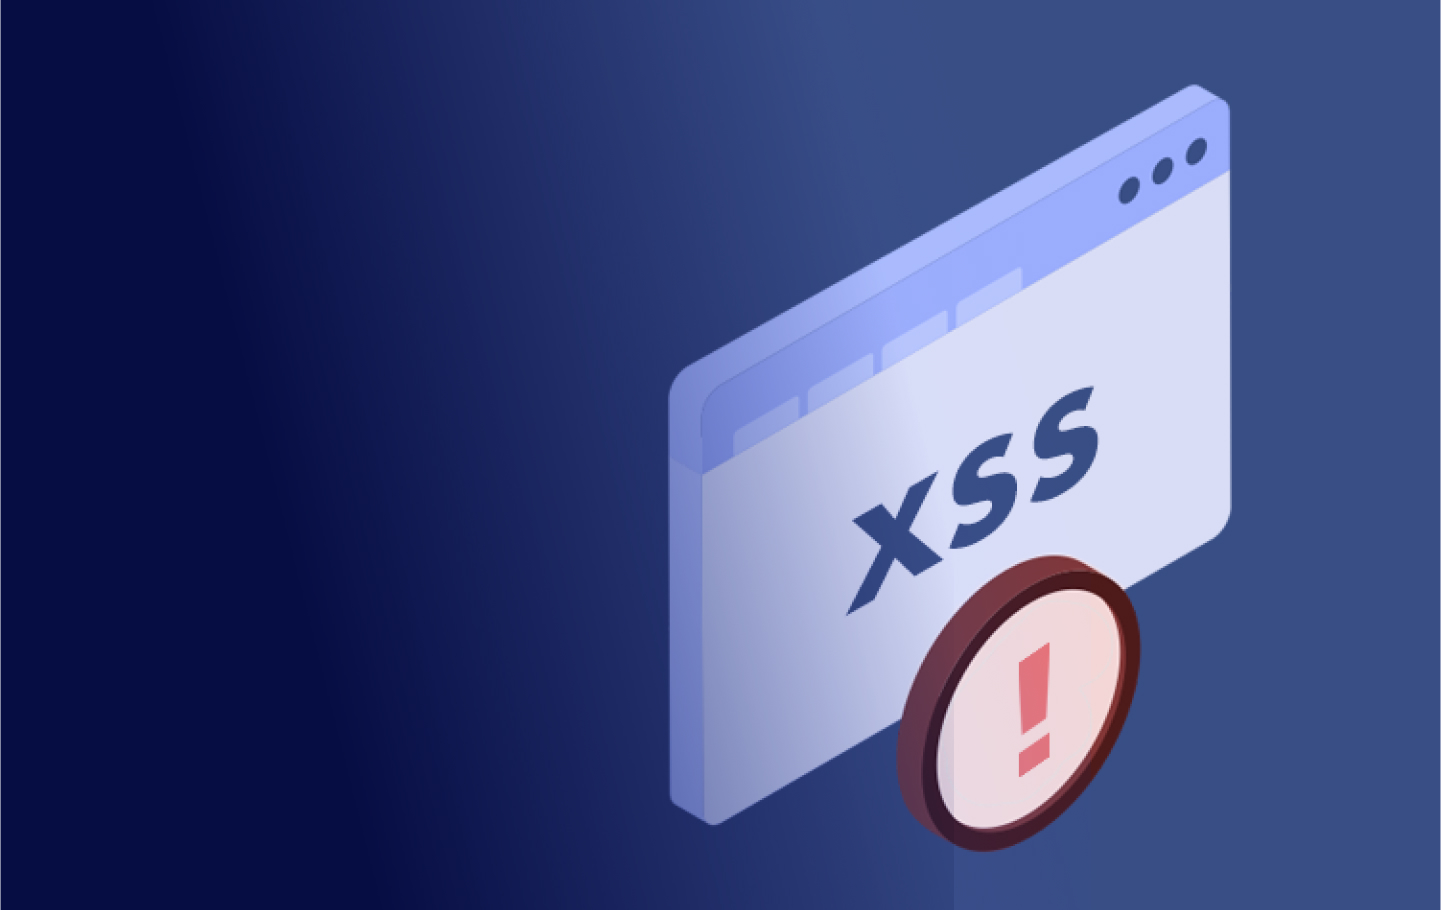 Reflected XSS, How to Prevent a Non-Persistent Attack